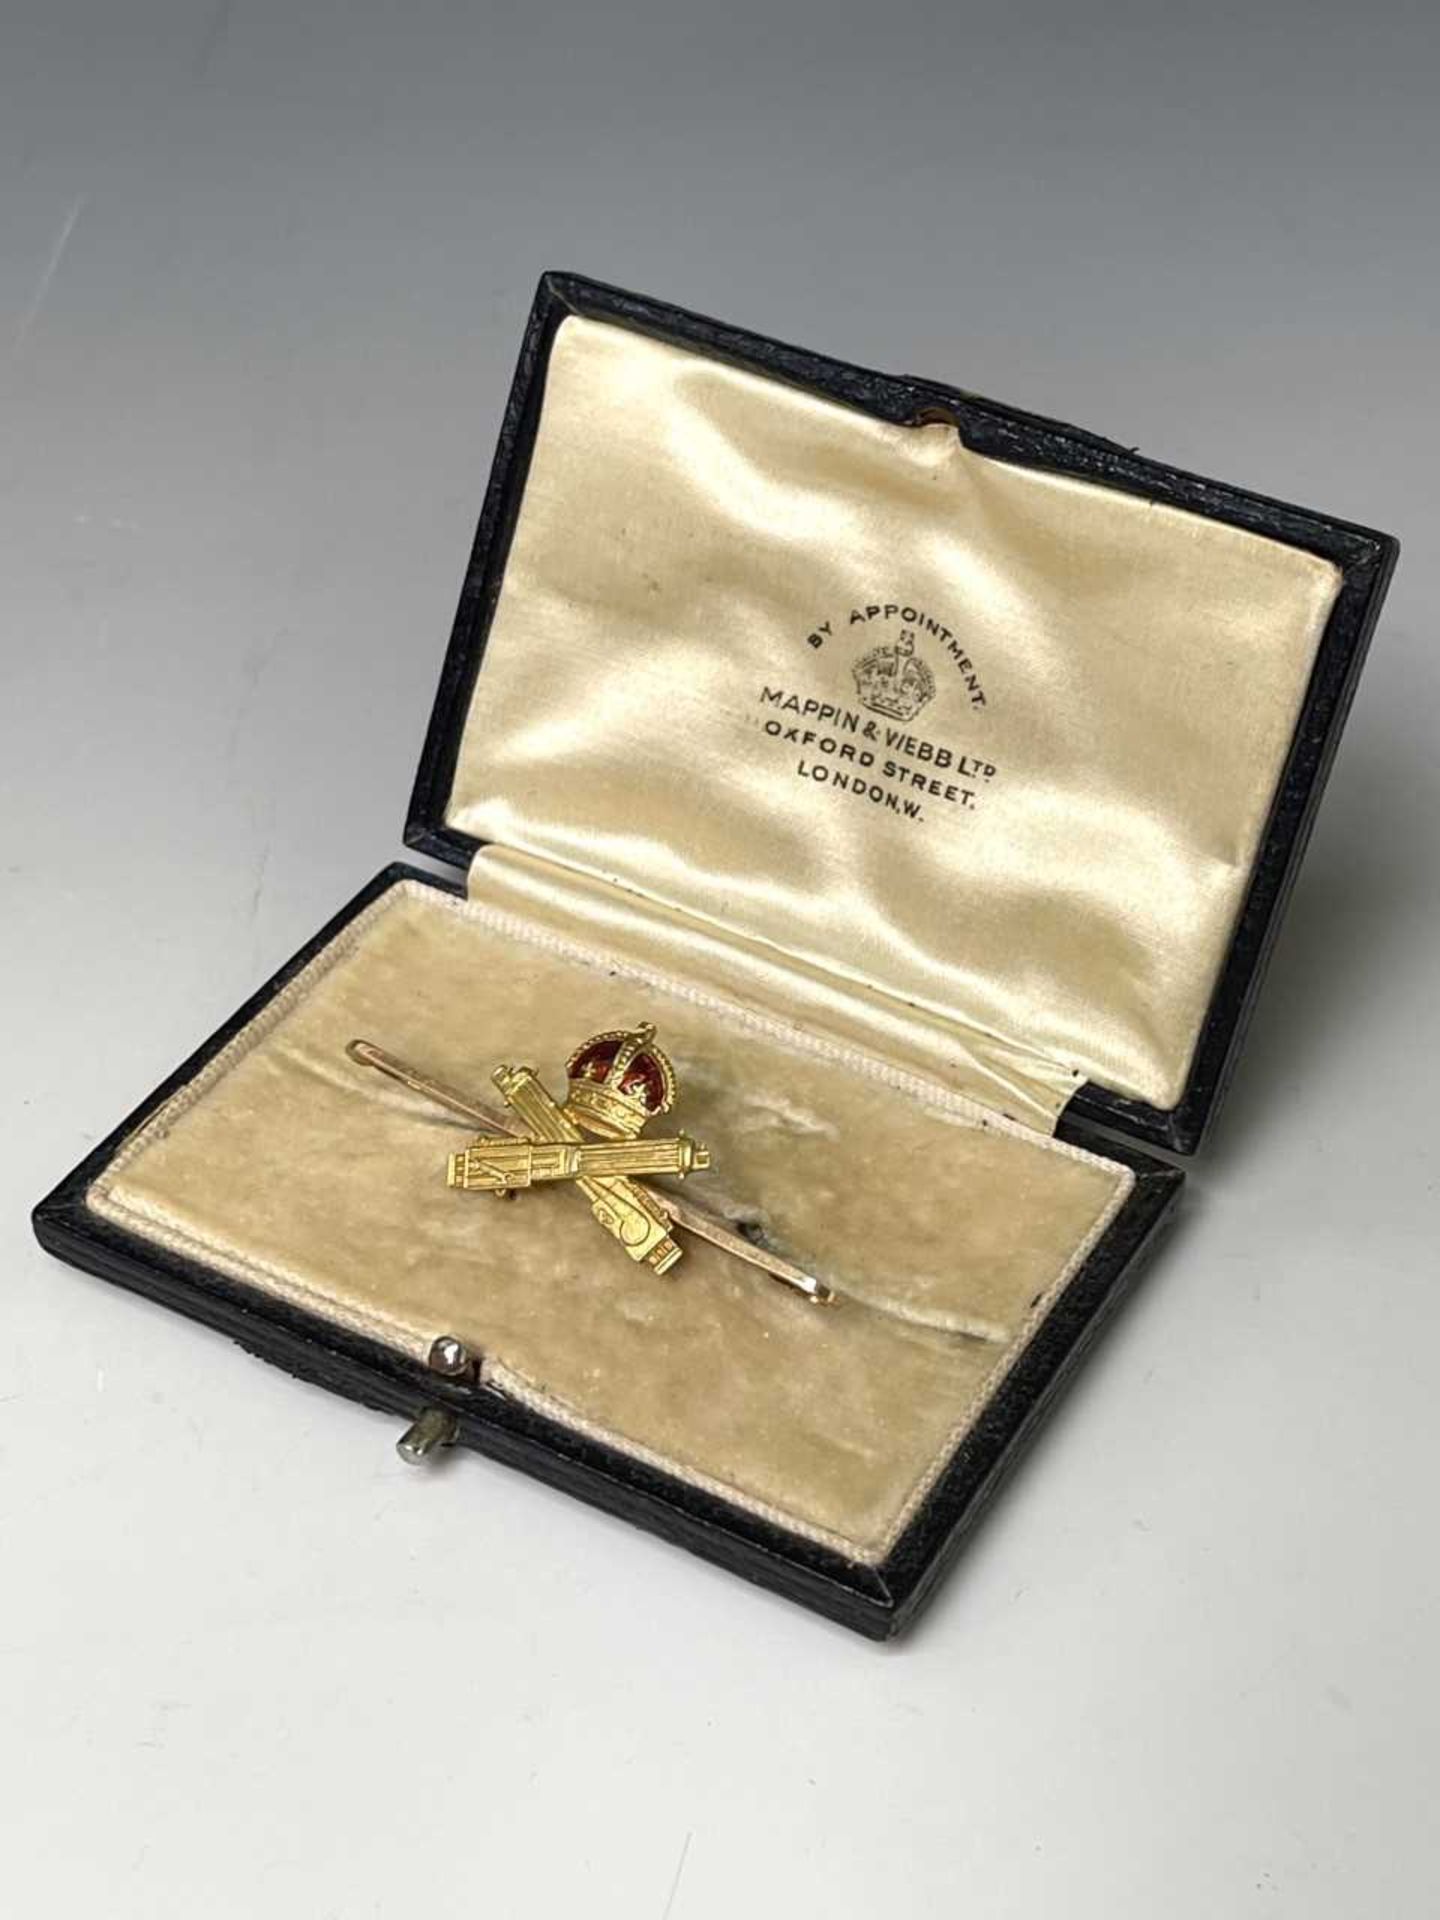 Machine Gun Corps Gold Tie Pin / Sweetheart Type Brooch. A Mappin & Webb cased 15ct gold and